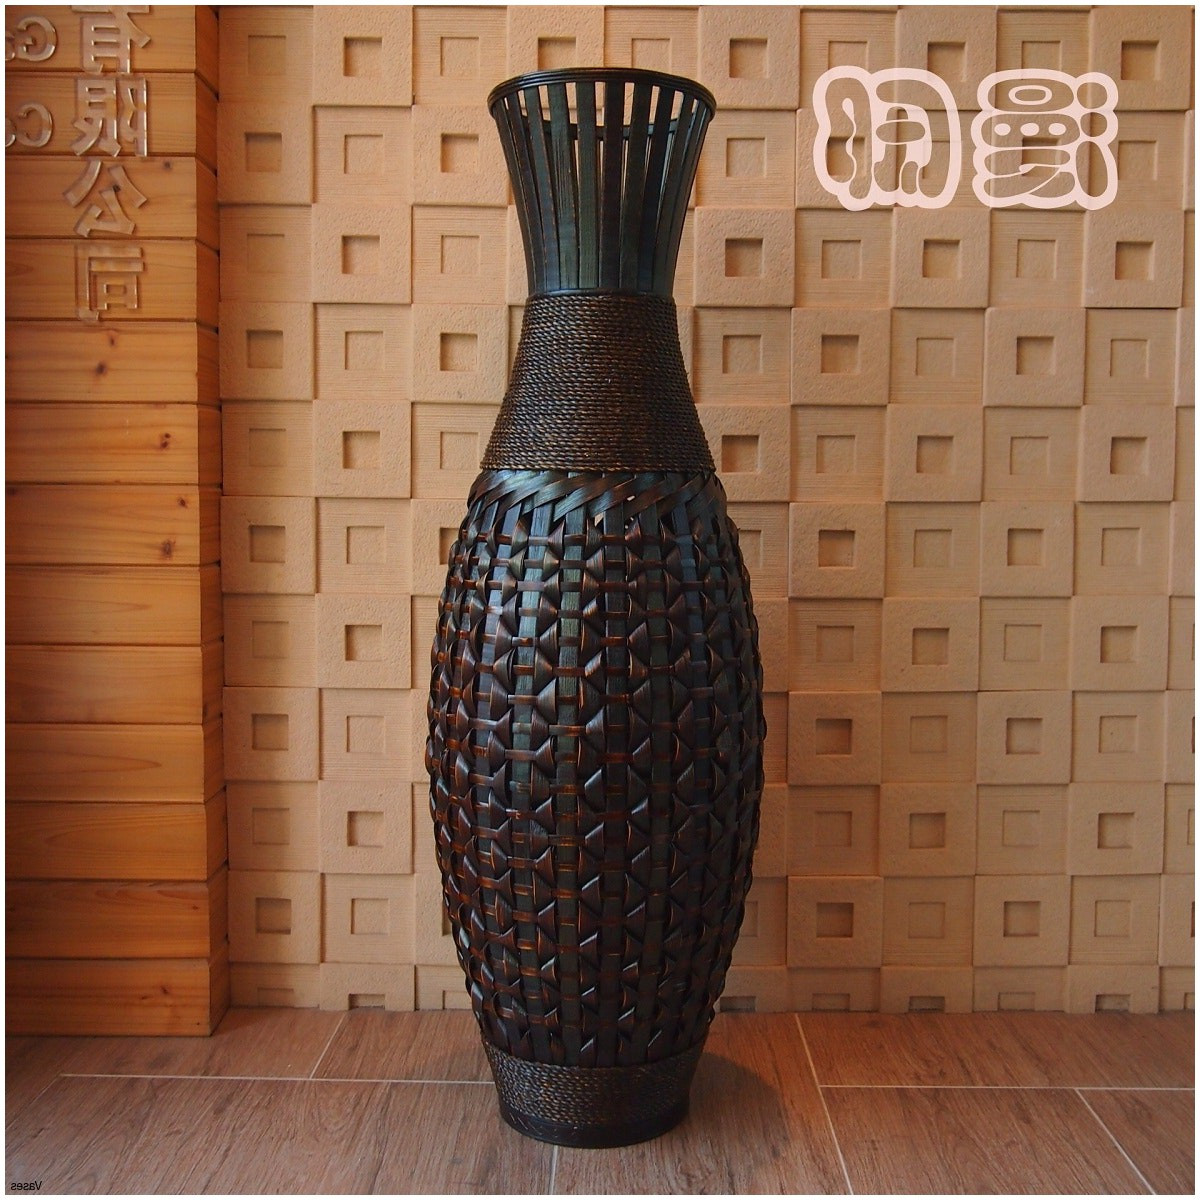 25 attractive Cheap Red Vases 2024 free download cheap red vases of 21 beau decorative vases anciendemutu org for mesmerizing wicker floor vase 107 vases uk cheap saleh sale fulli 0d